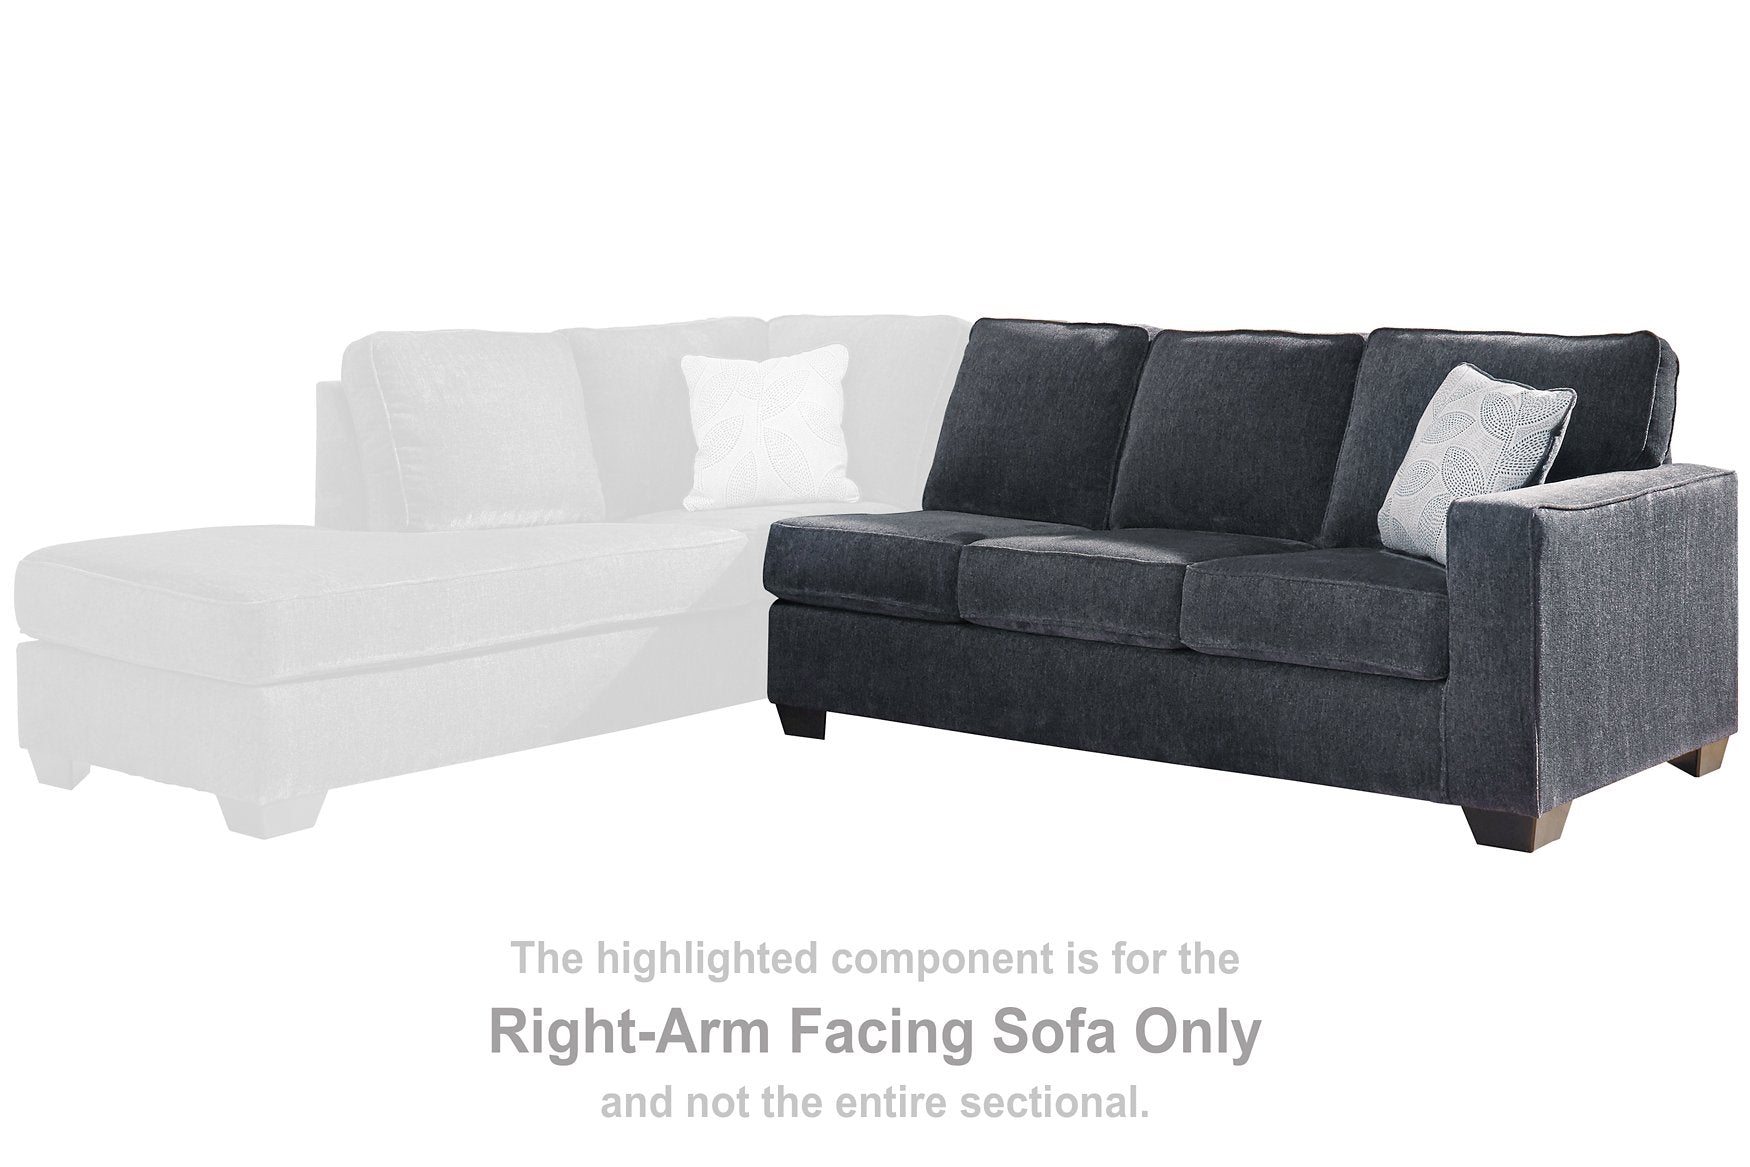 Altari 2-Piece Sectional with Chaise - Half Price Furniture